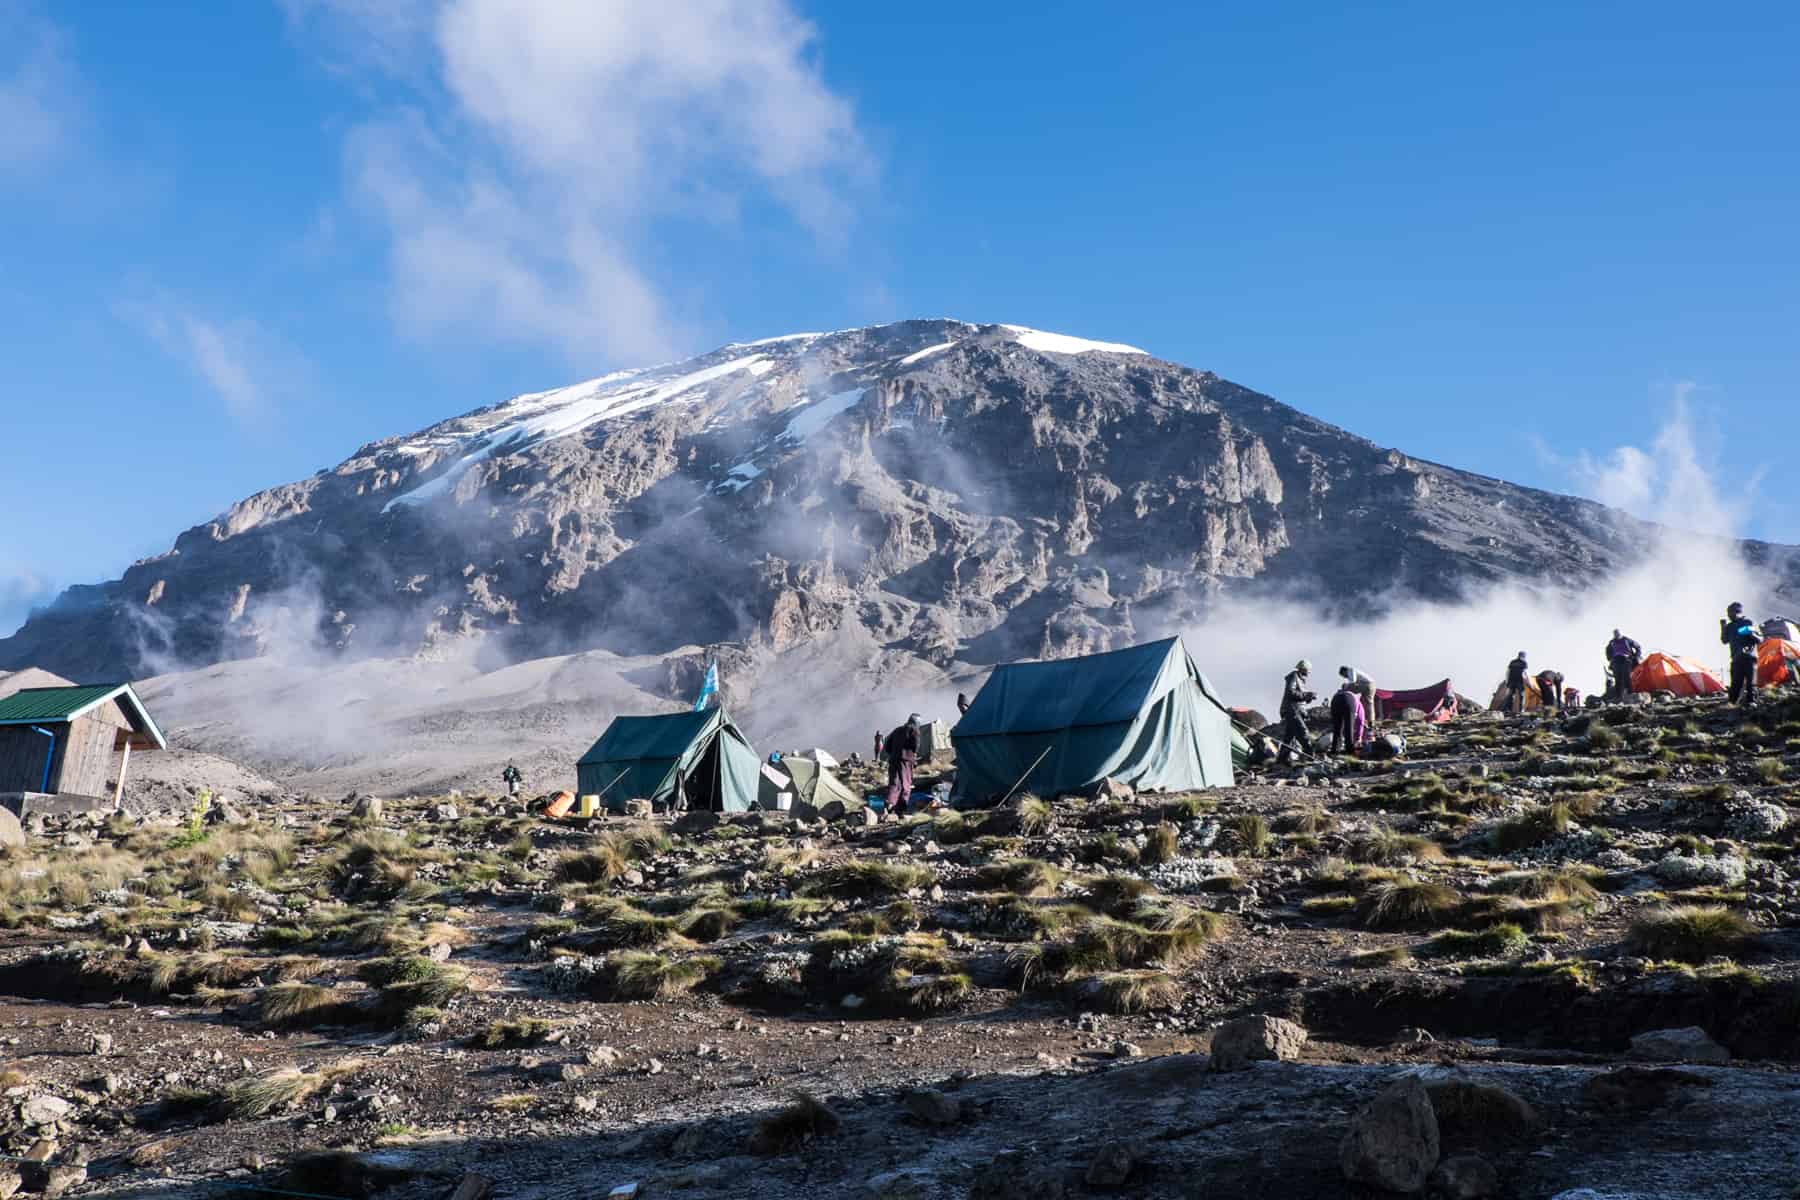 Two large green tents, at a campsite set up at the base of the snow-capped Kilimanjaro mountain. 